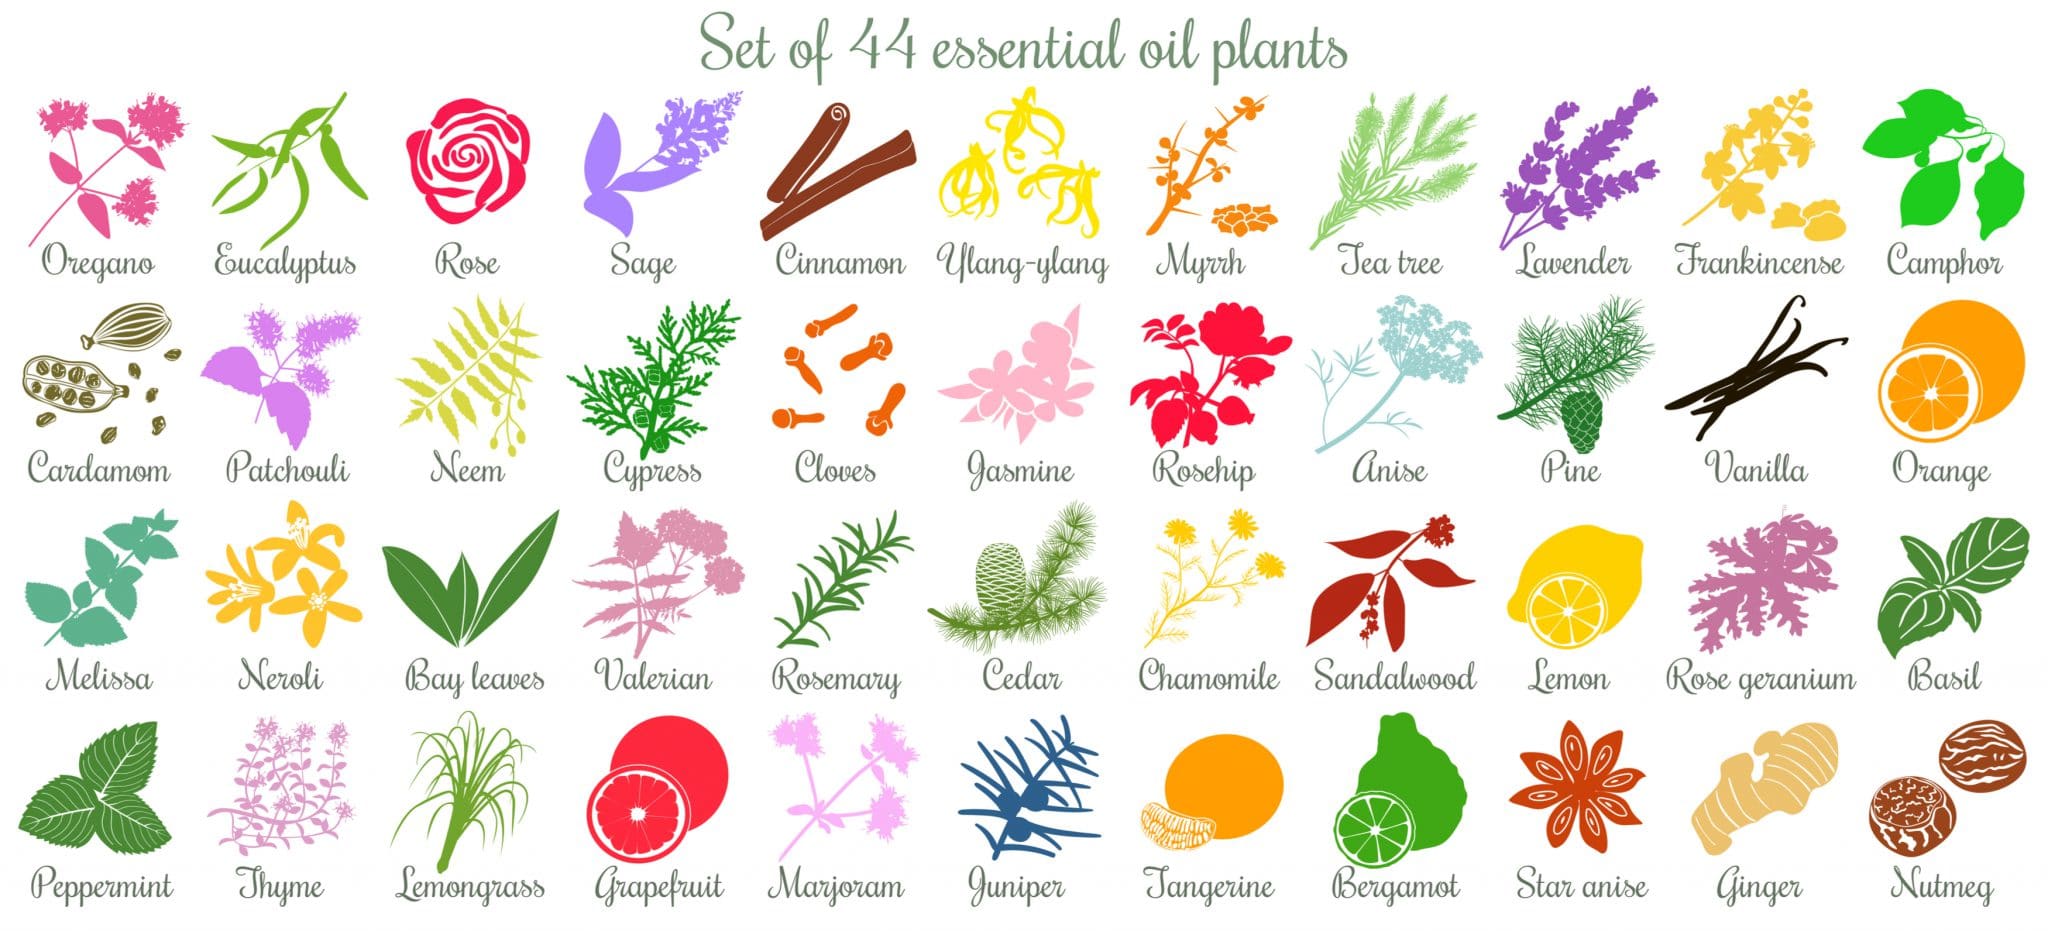 essential oil chart